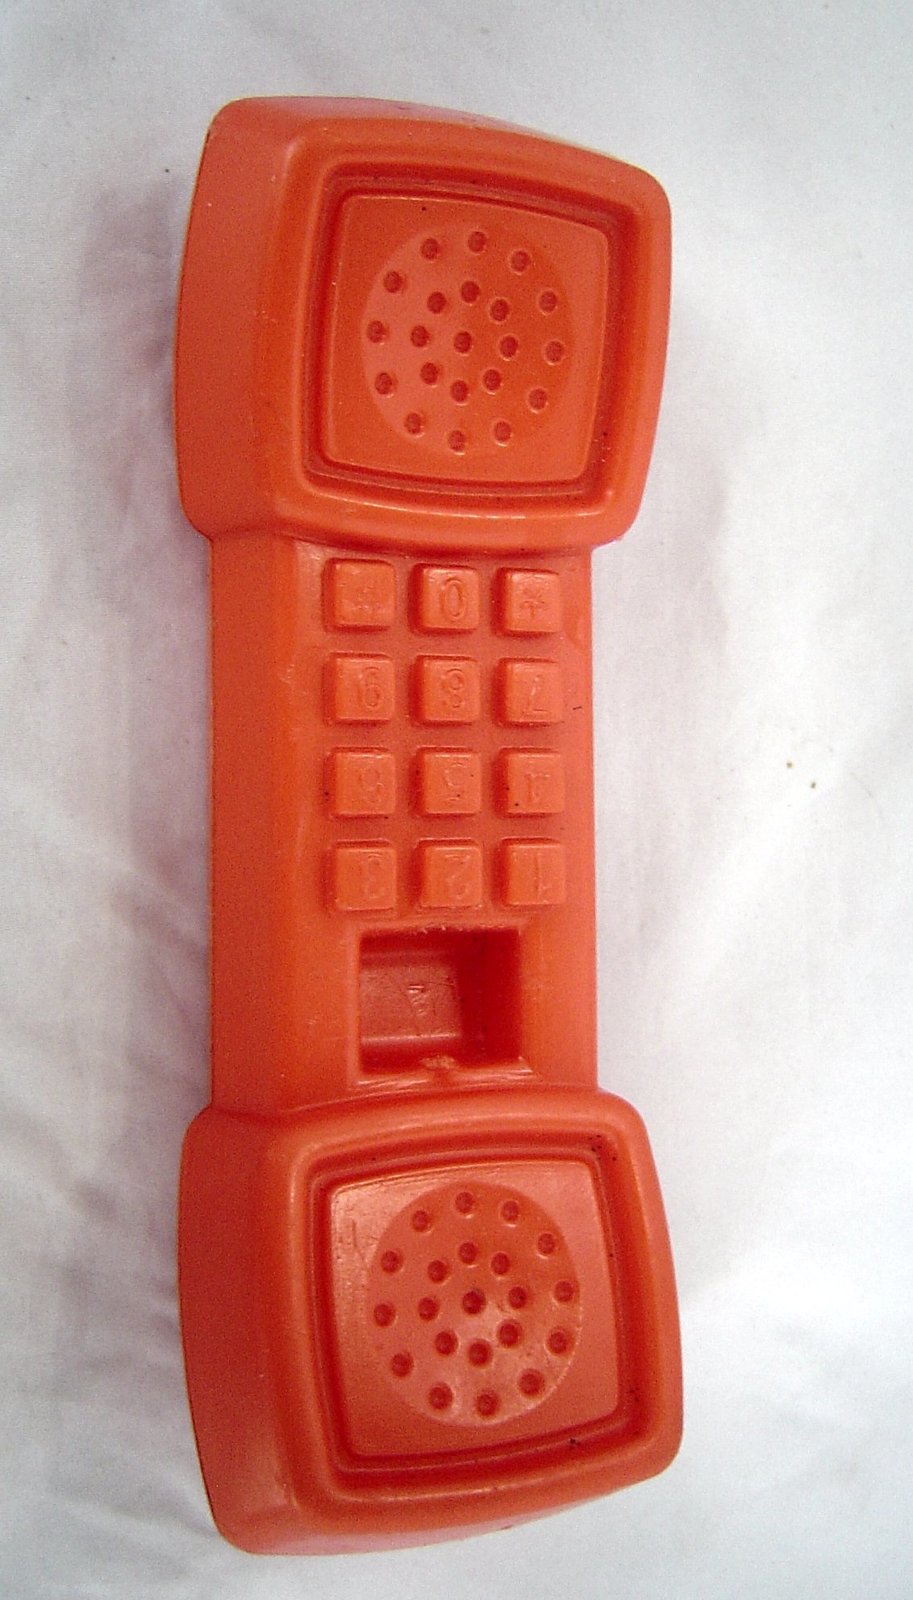   Fisher Price Fun with Food Orange Pretend Play Kitchen Replacement Phone Vinta - $14.99